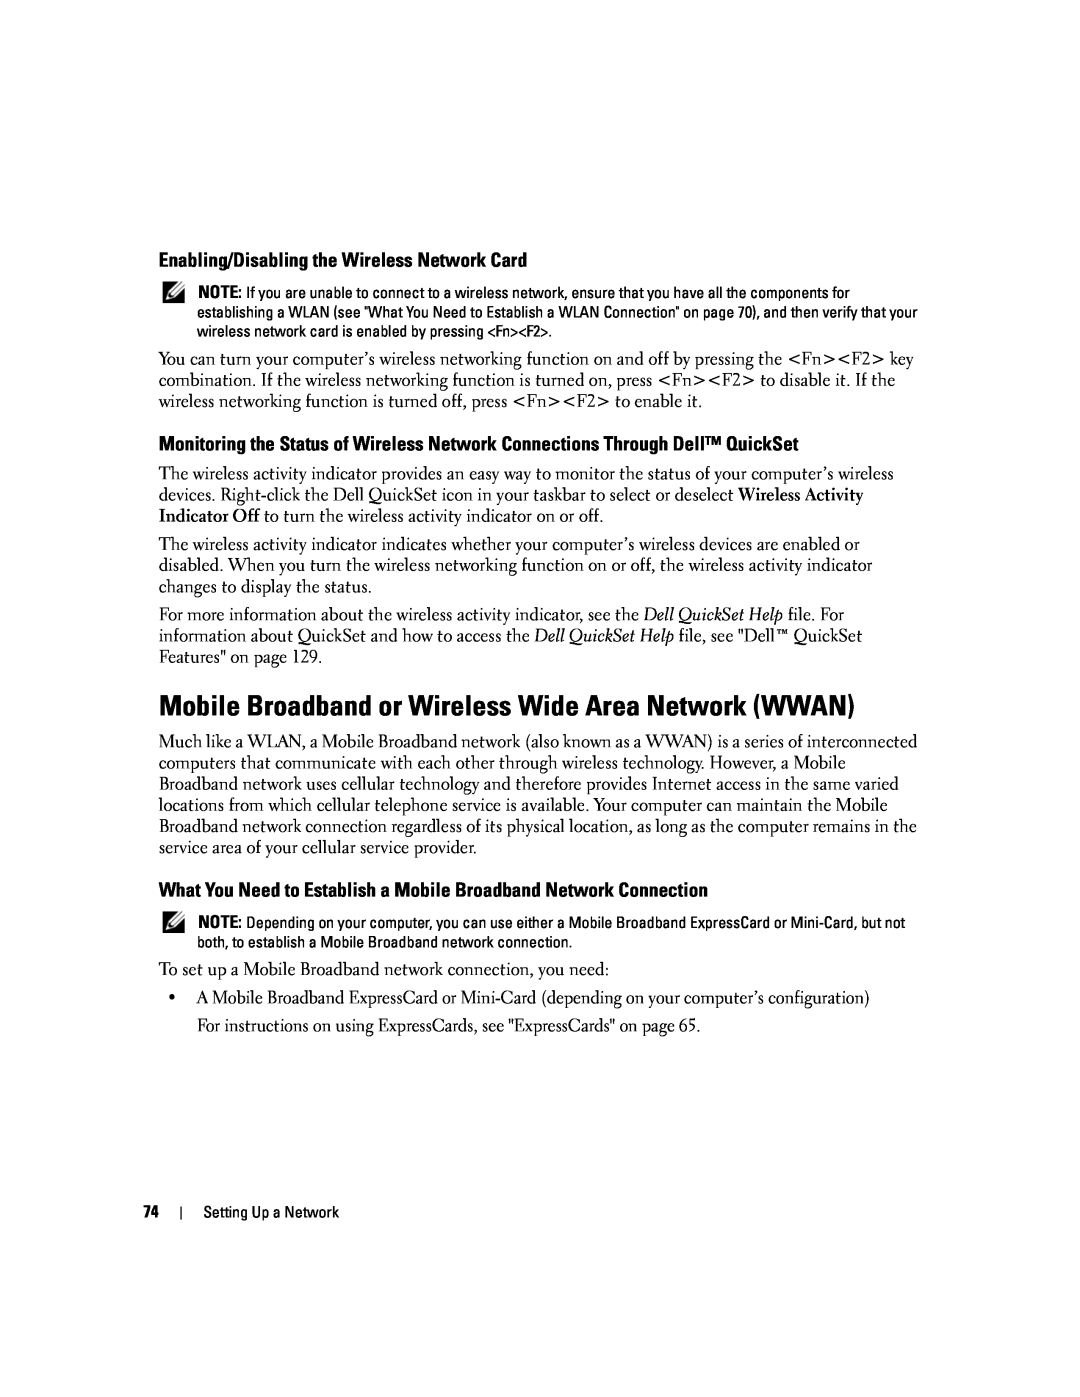 Dell PP20L owner manual Mobile Broadband or Wireless Wide Area Network WWAN, Enabling/Disabling the Wireless Network Card 